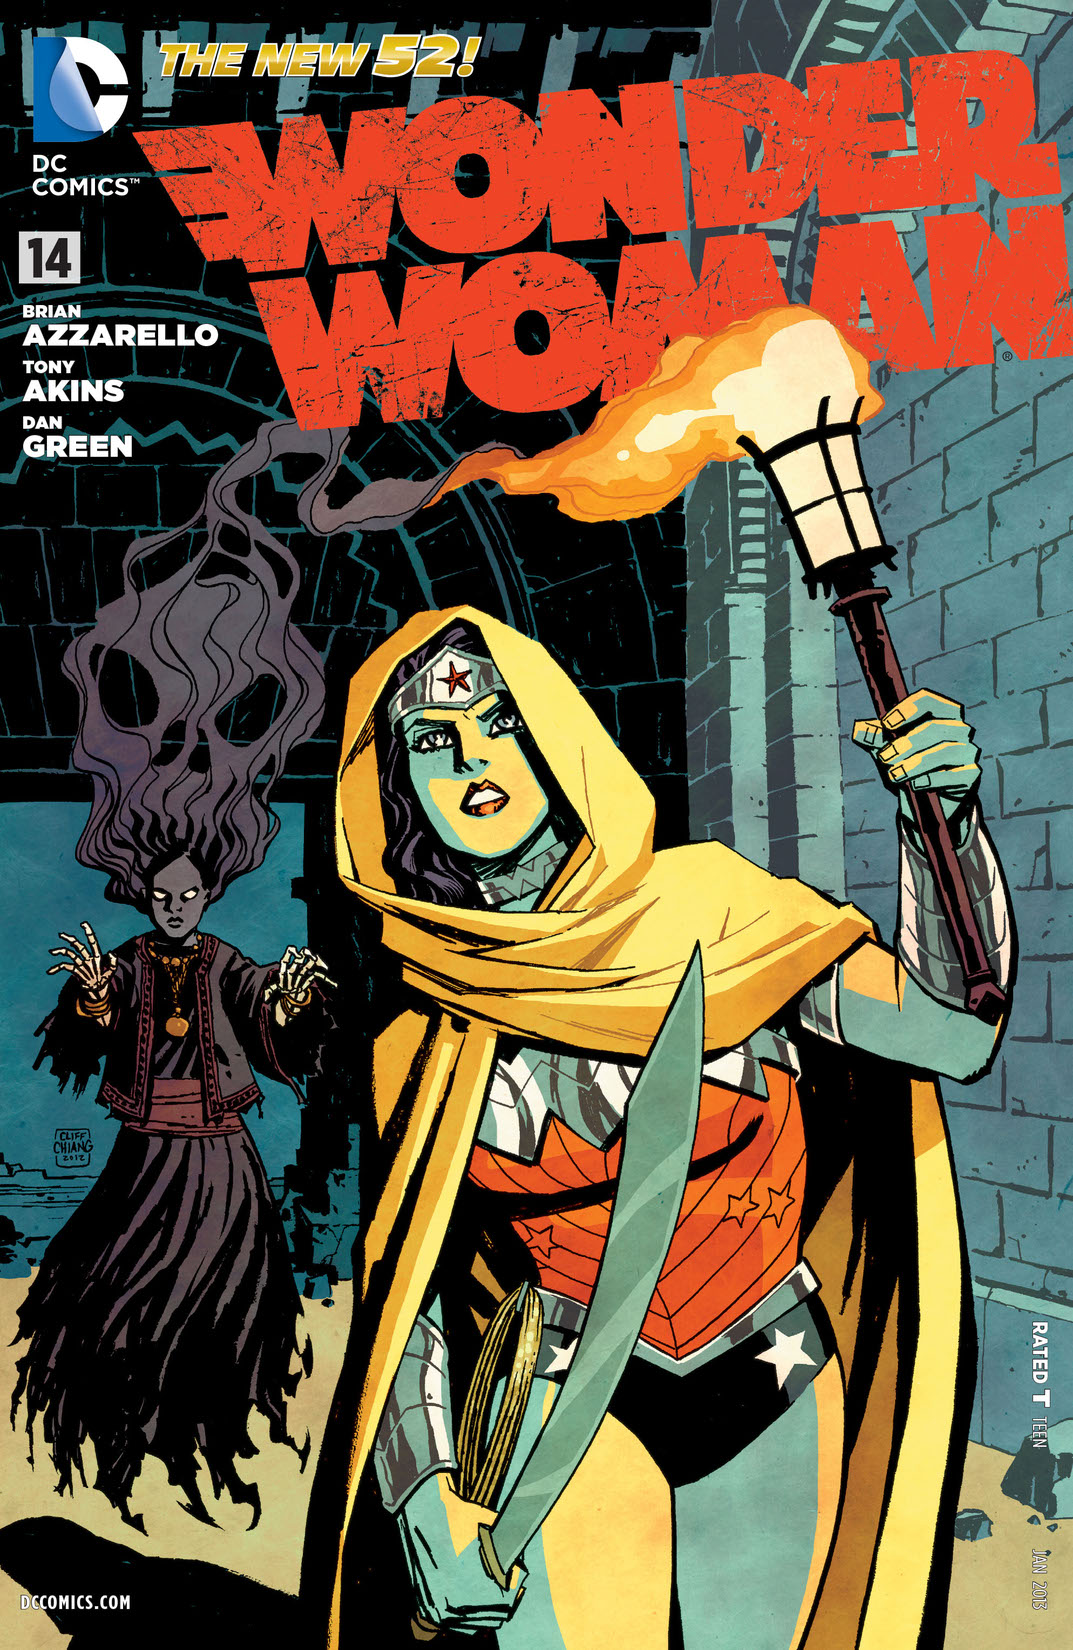 Wonder Woman (2011-) #14 preview images